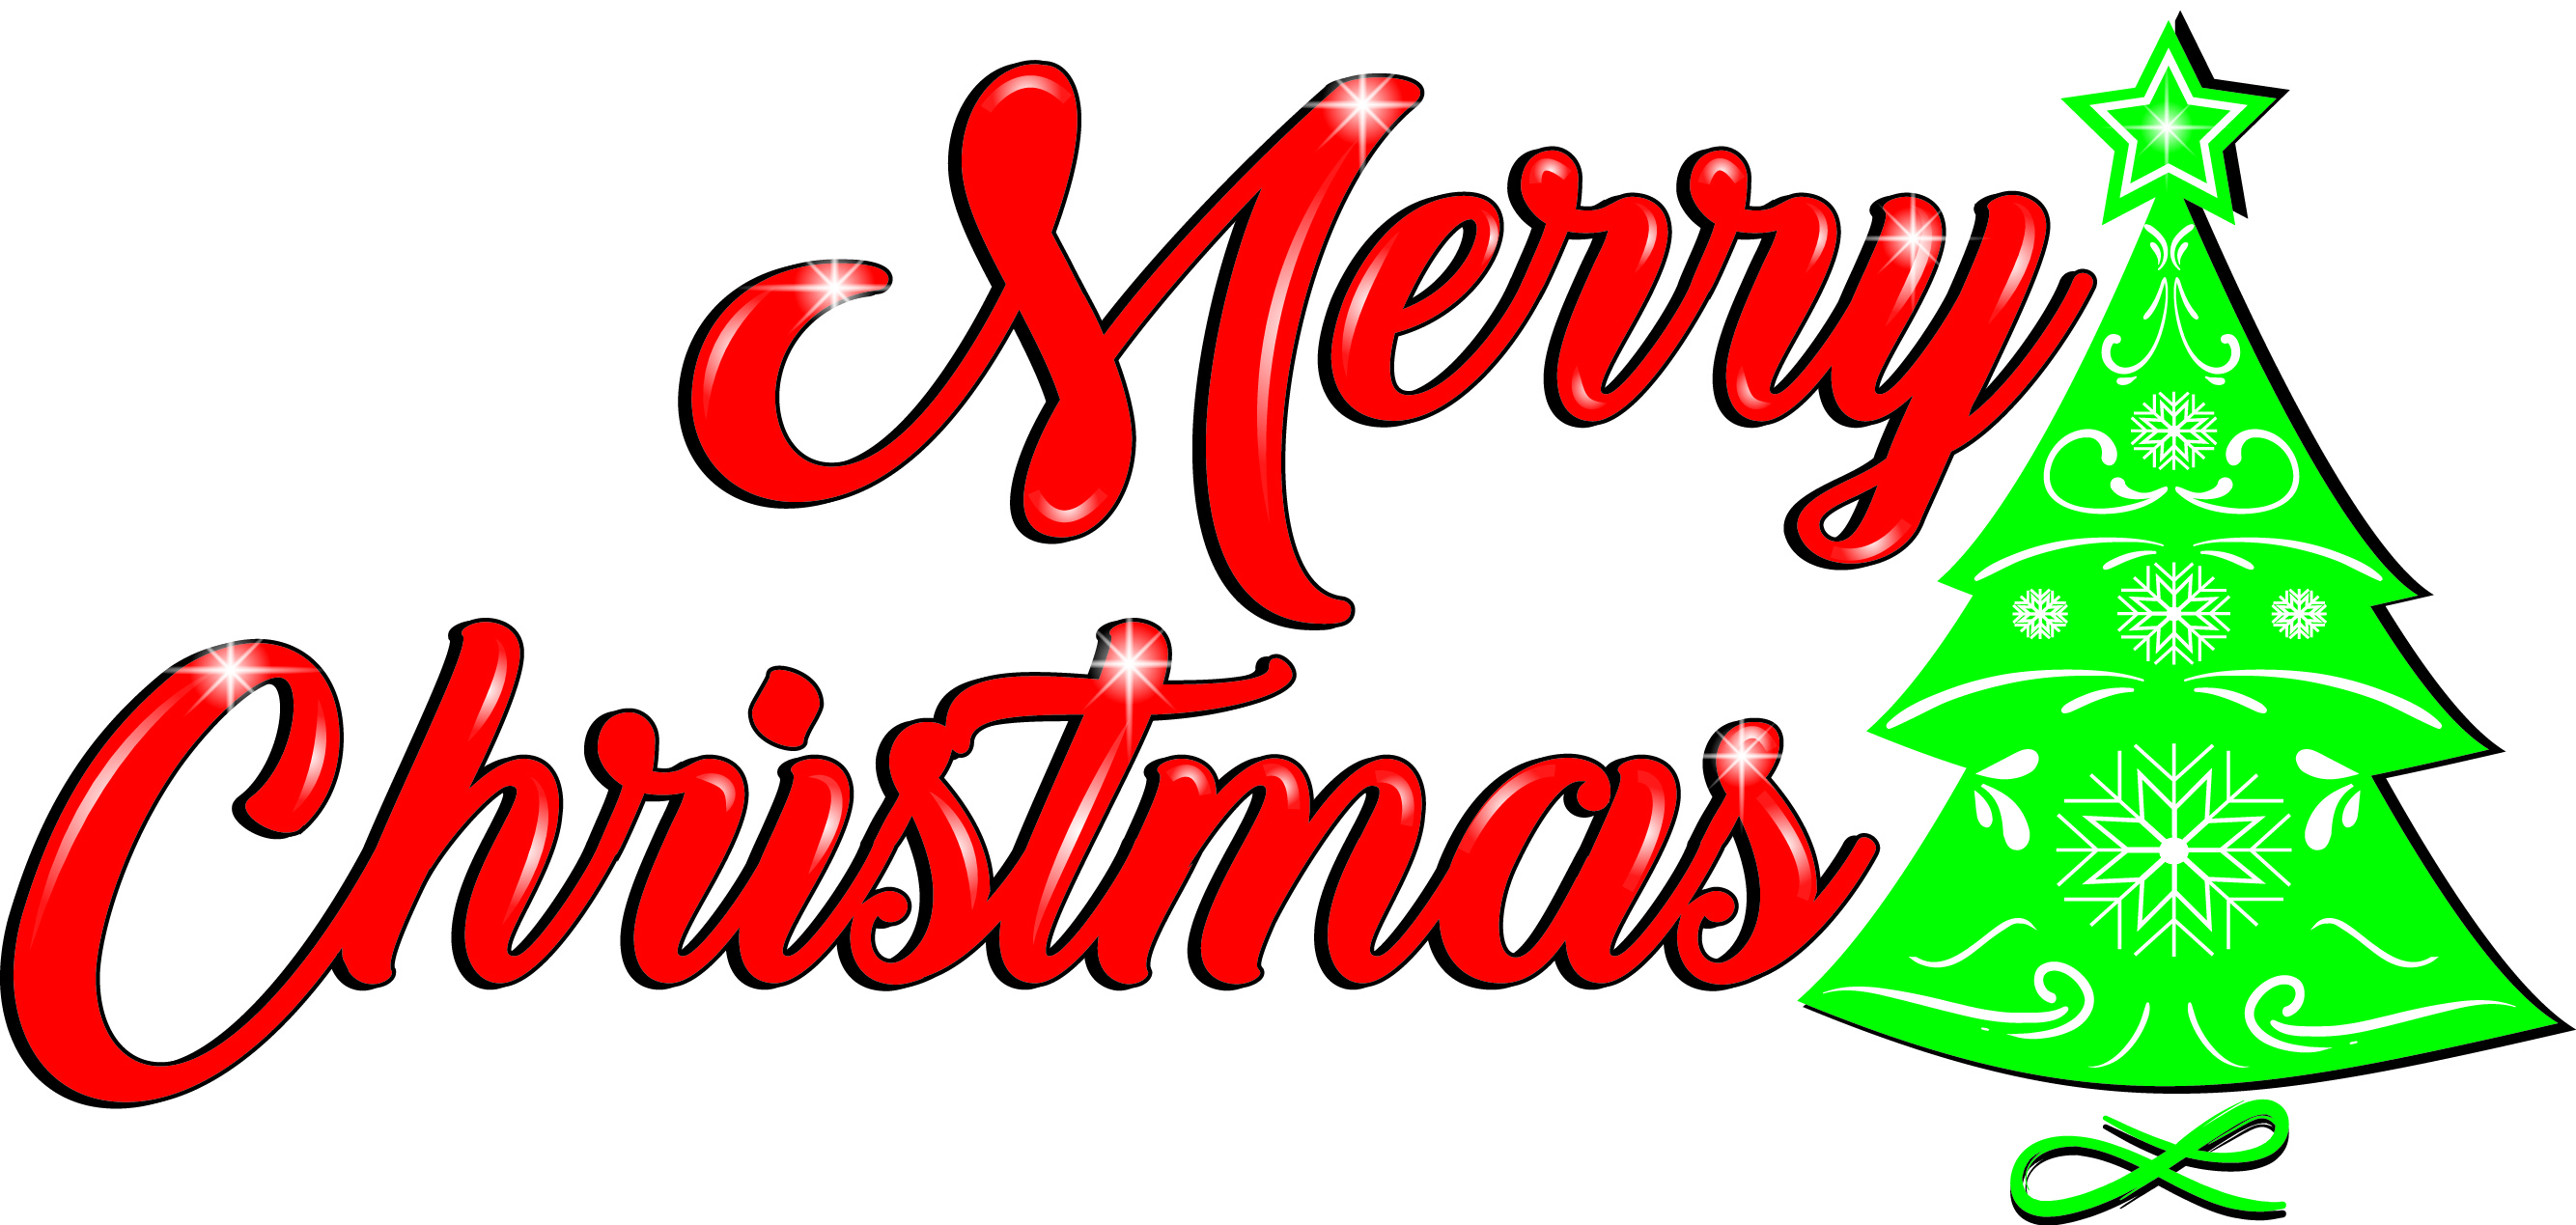 Download Merry Christmas Instant Download Believe Christmas SVG ...